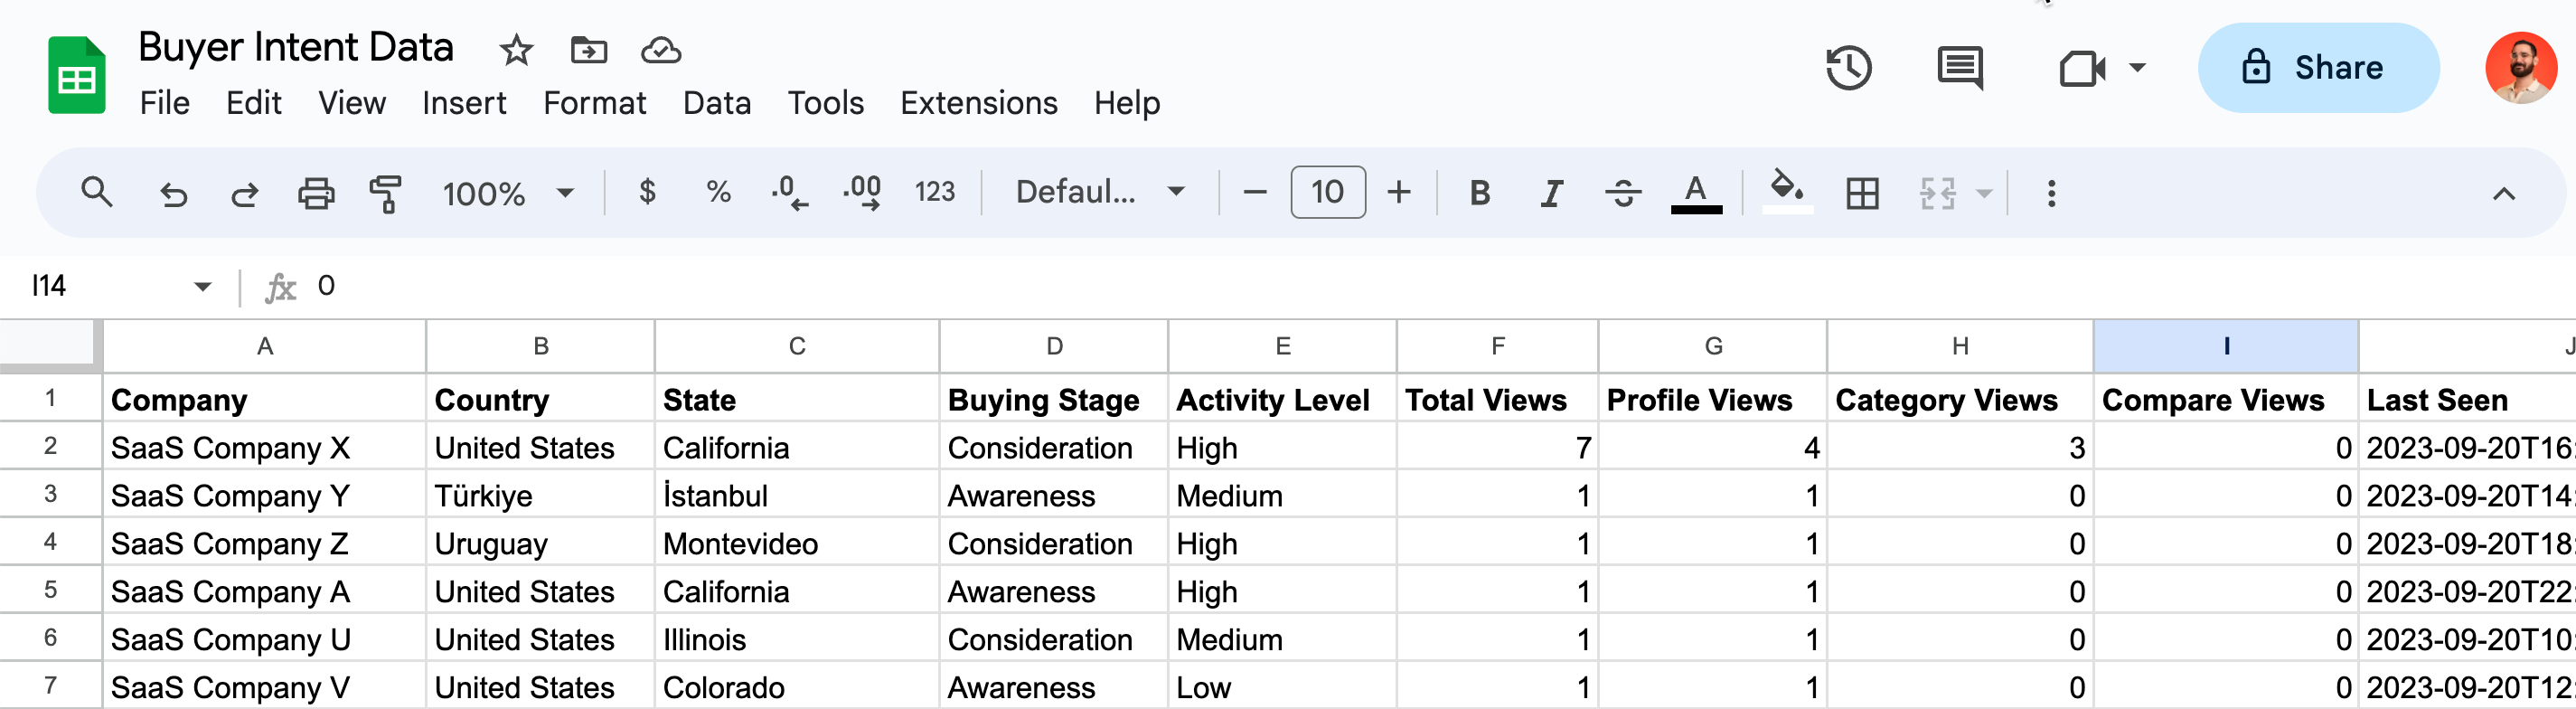 An example of Buyer Intent data in a Google sheet. Includes key columns like Company, Name, Profile Views, Category Views, Last Seen, etc. Each row represents a new Buyer Intent signal.